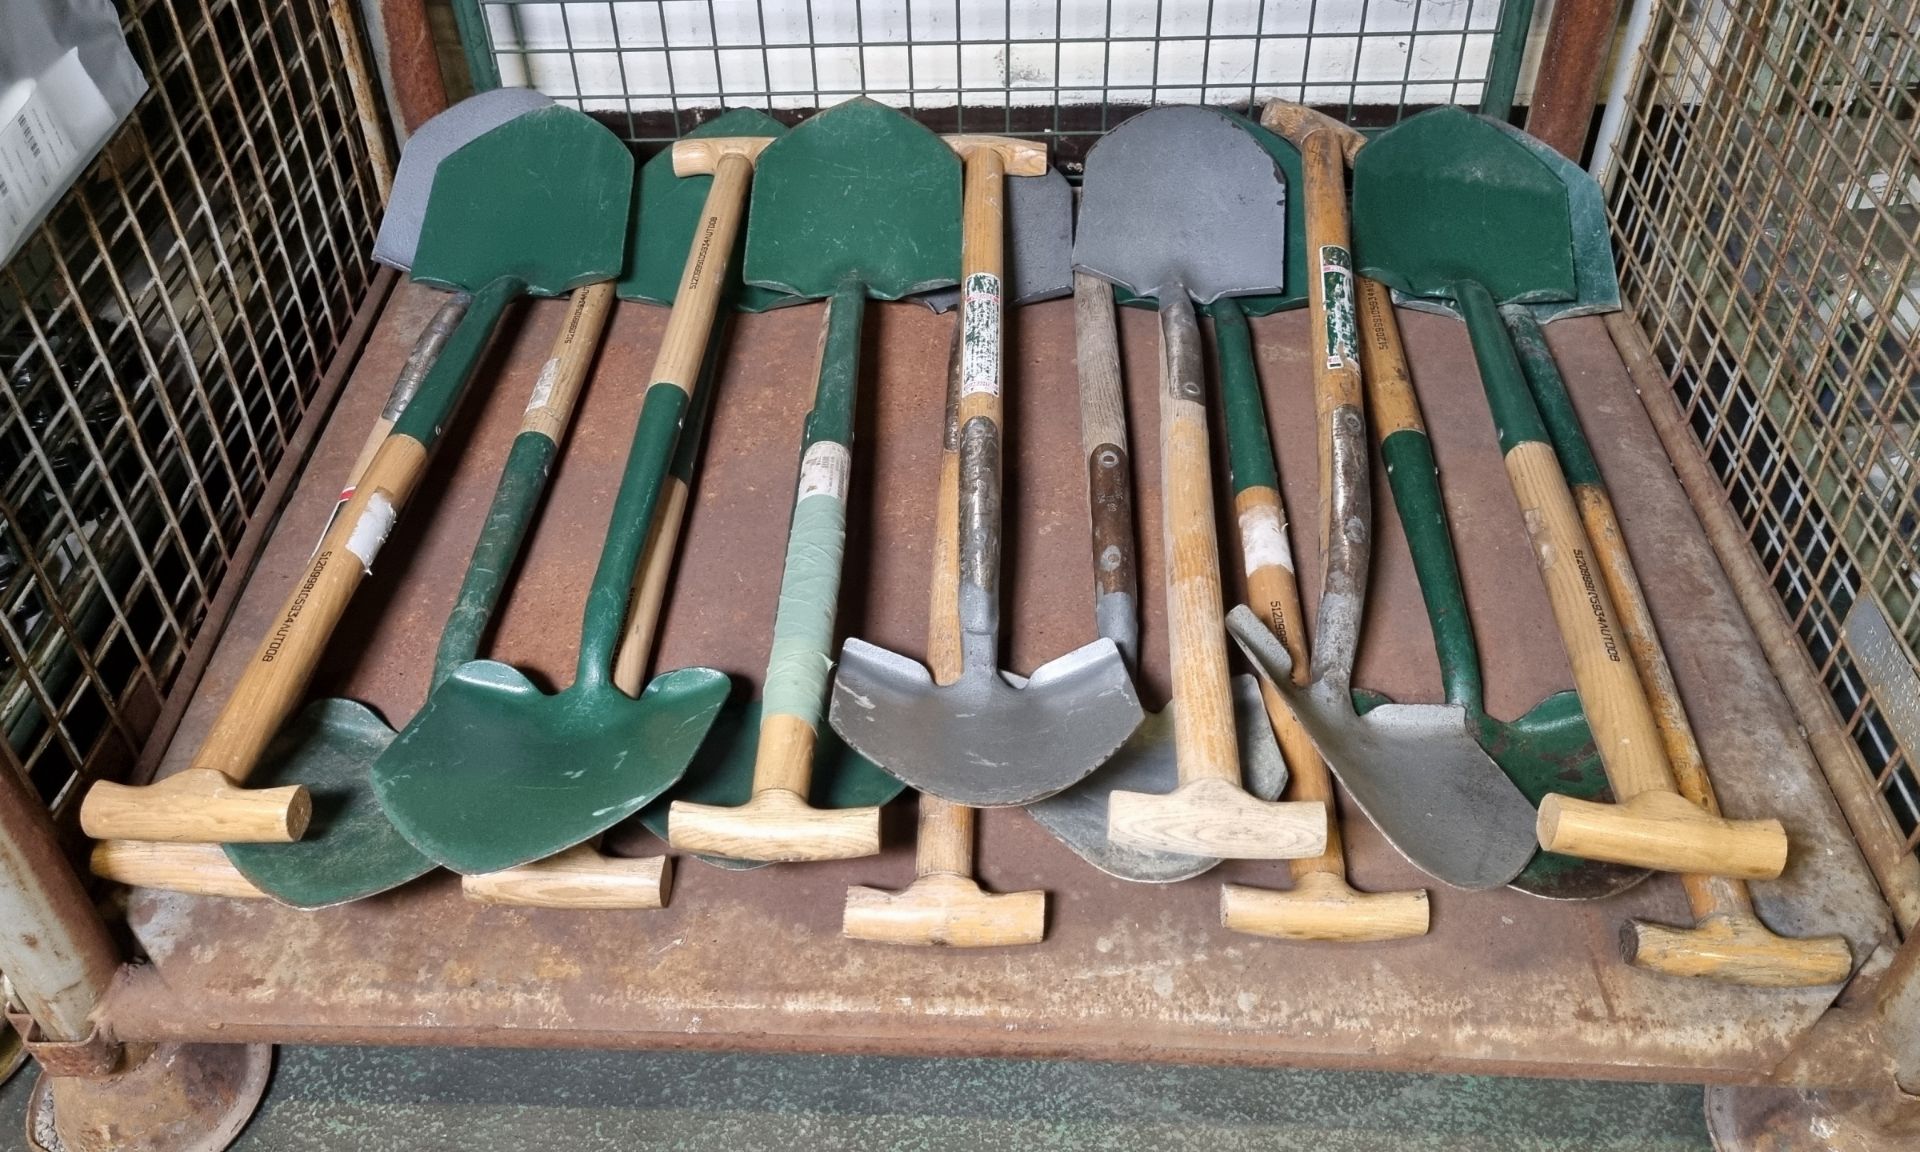 16x Wooden handle Round head shovels - Image 2 of 4